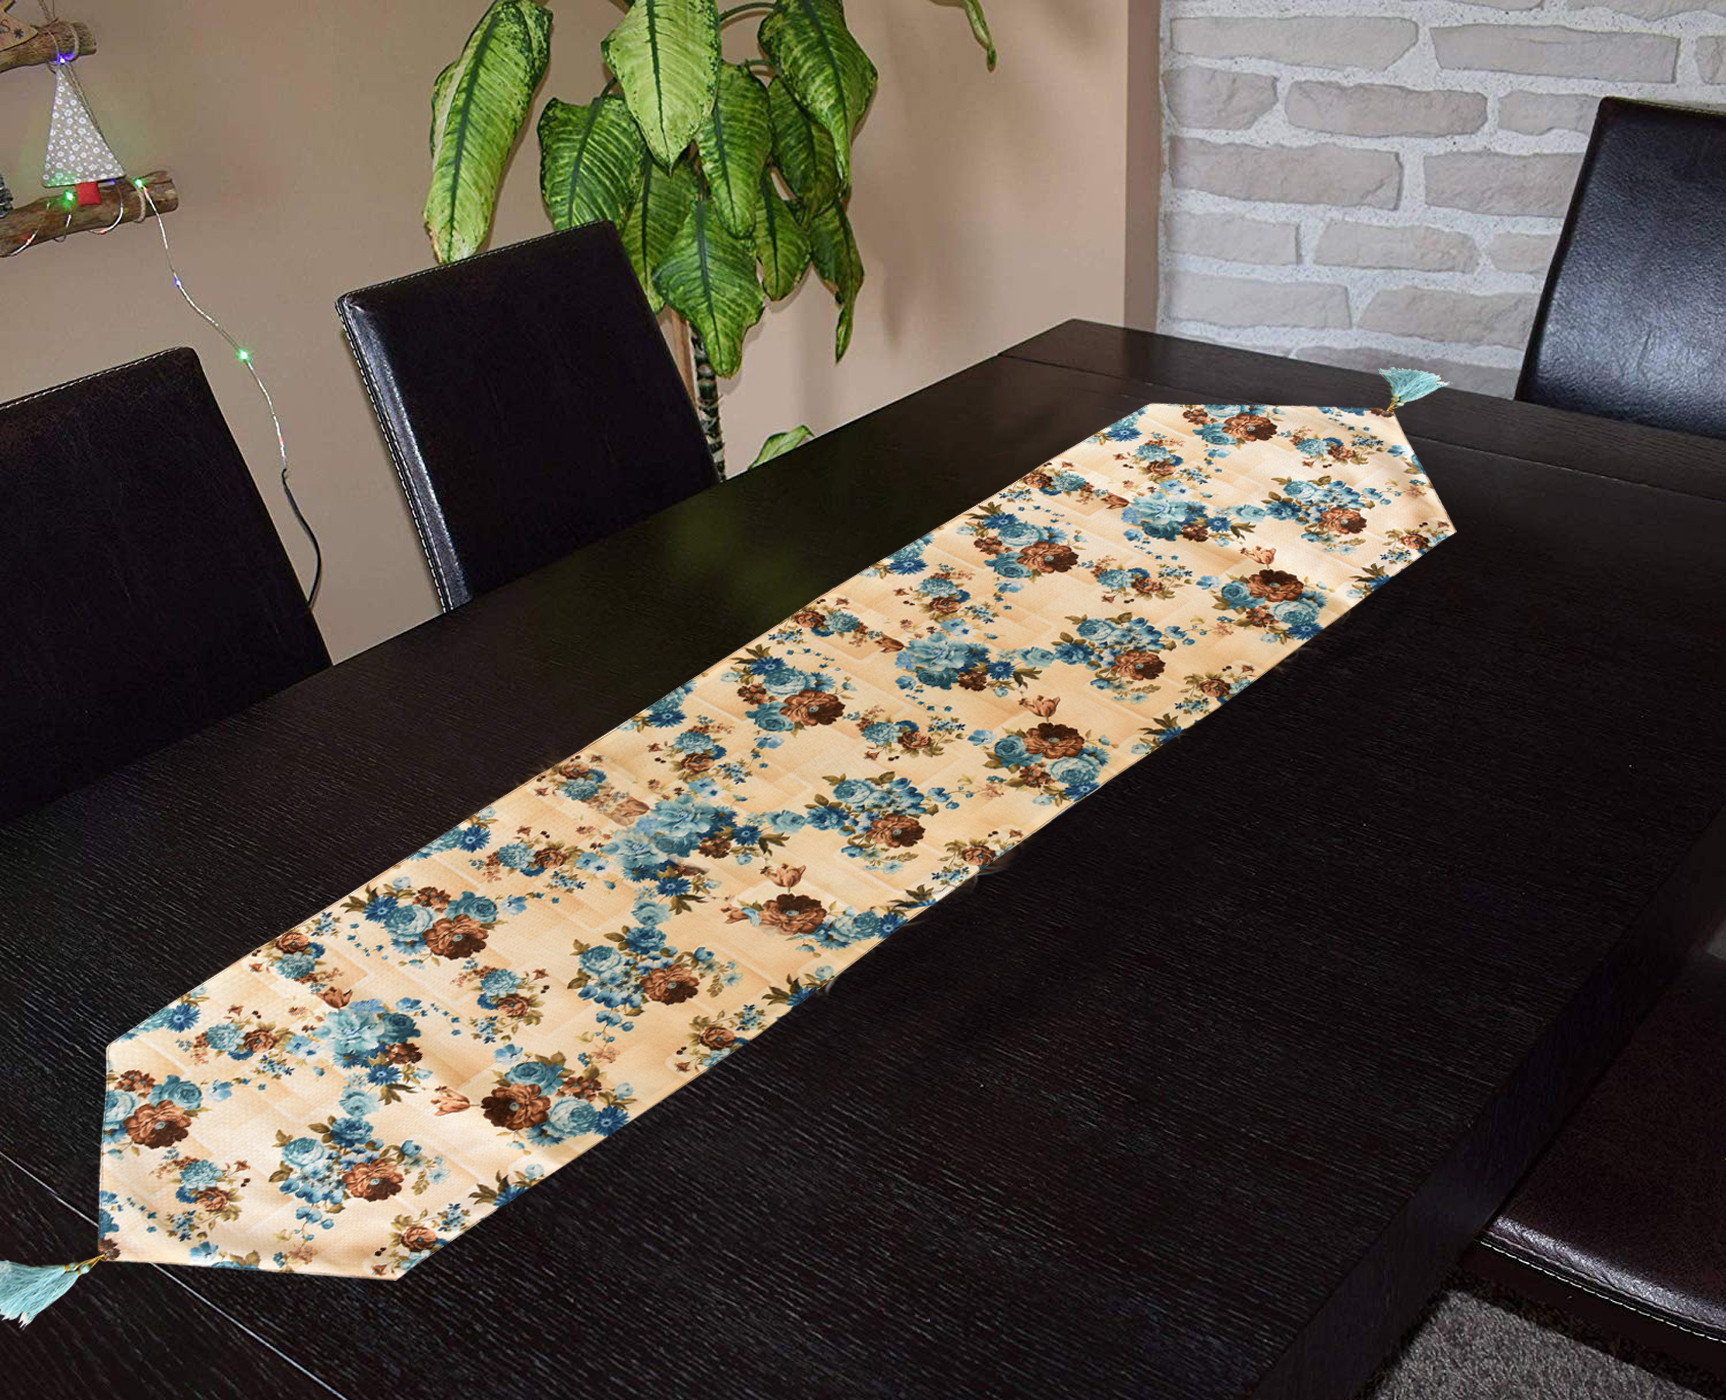 Kuber Industries Flower Design Cotton Table Runner for Family Dinners or Gatherings, Indoor or Outdoor Parties & Everyday Use, 16